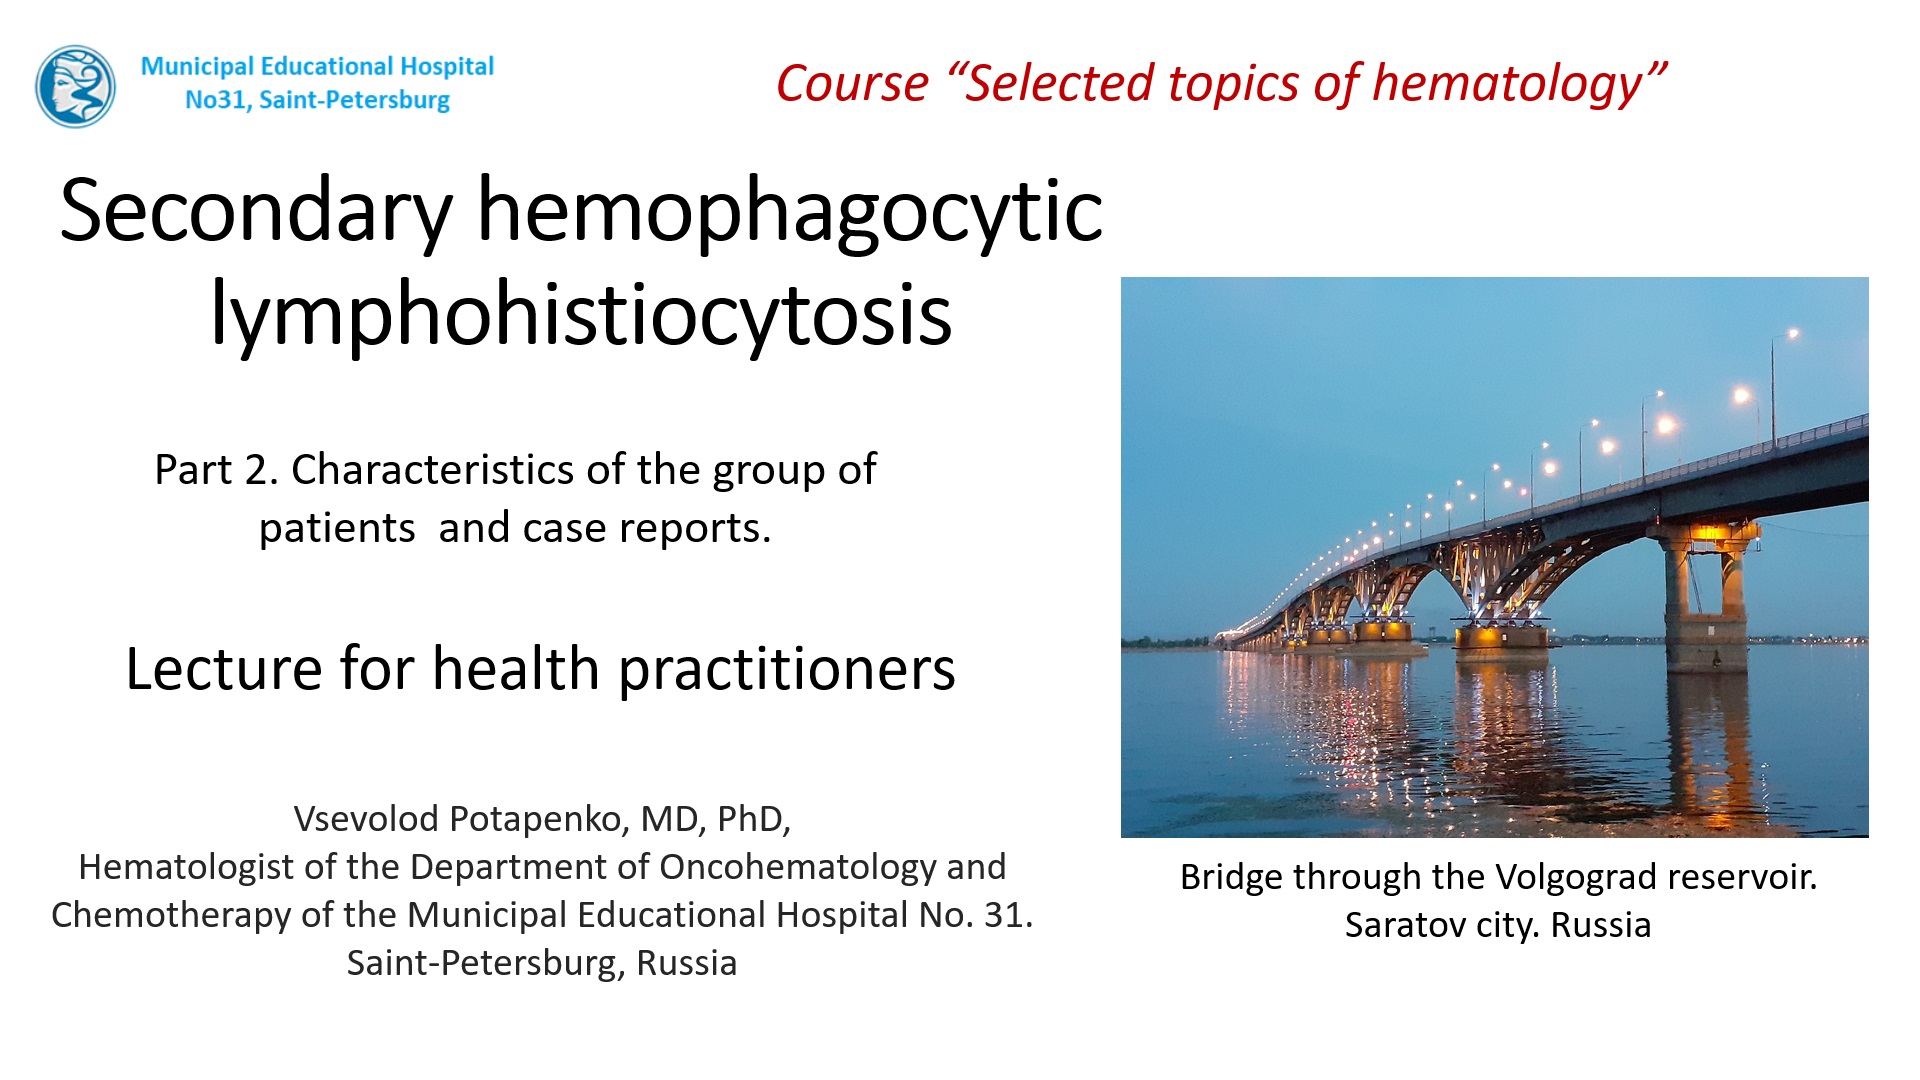 Secodary hemophagocytic syndrome. Part 2. Characteristics of the group of patients and case reports